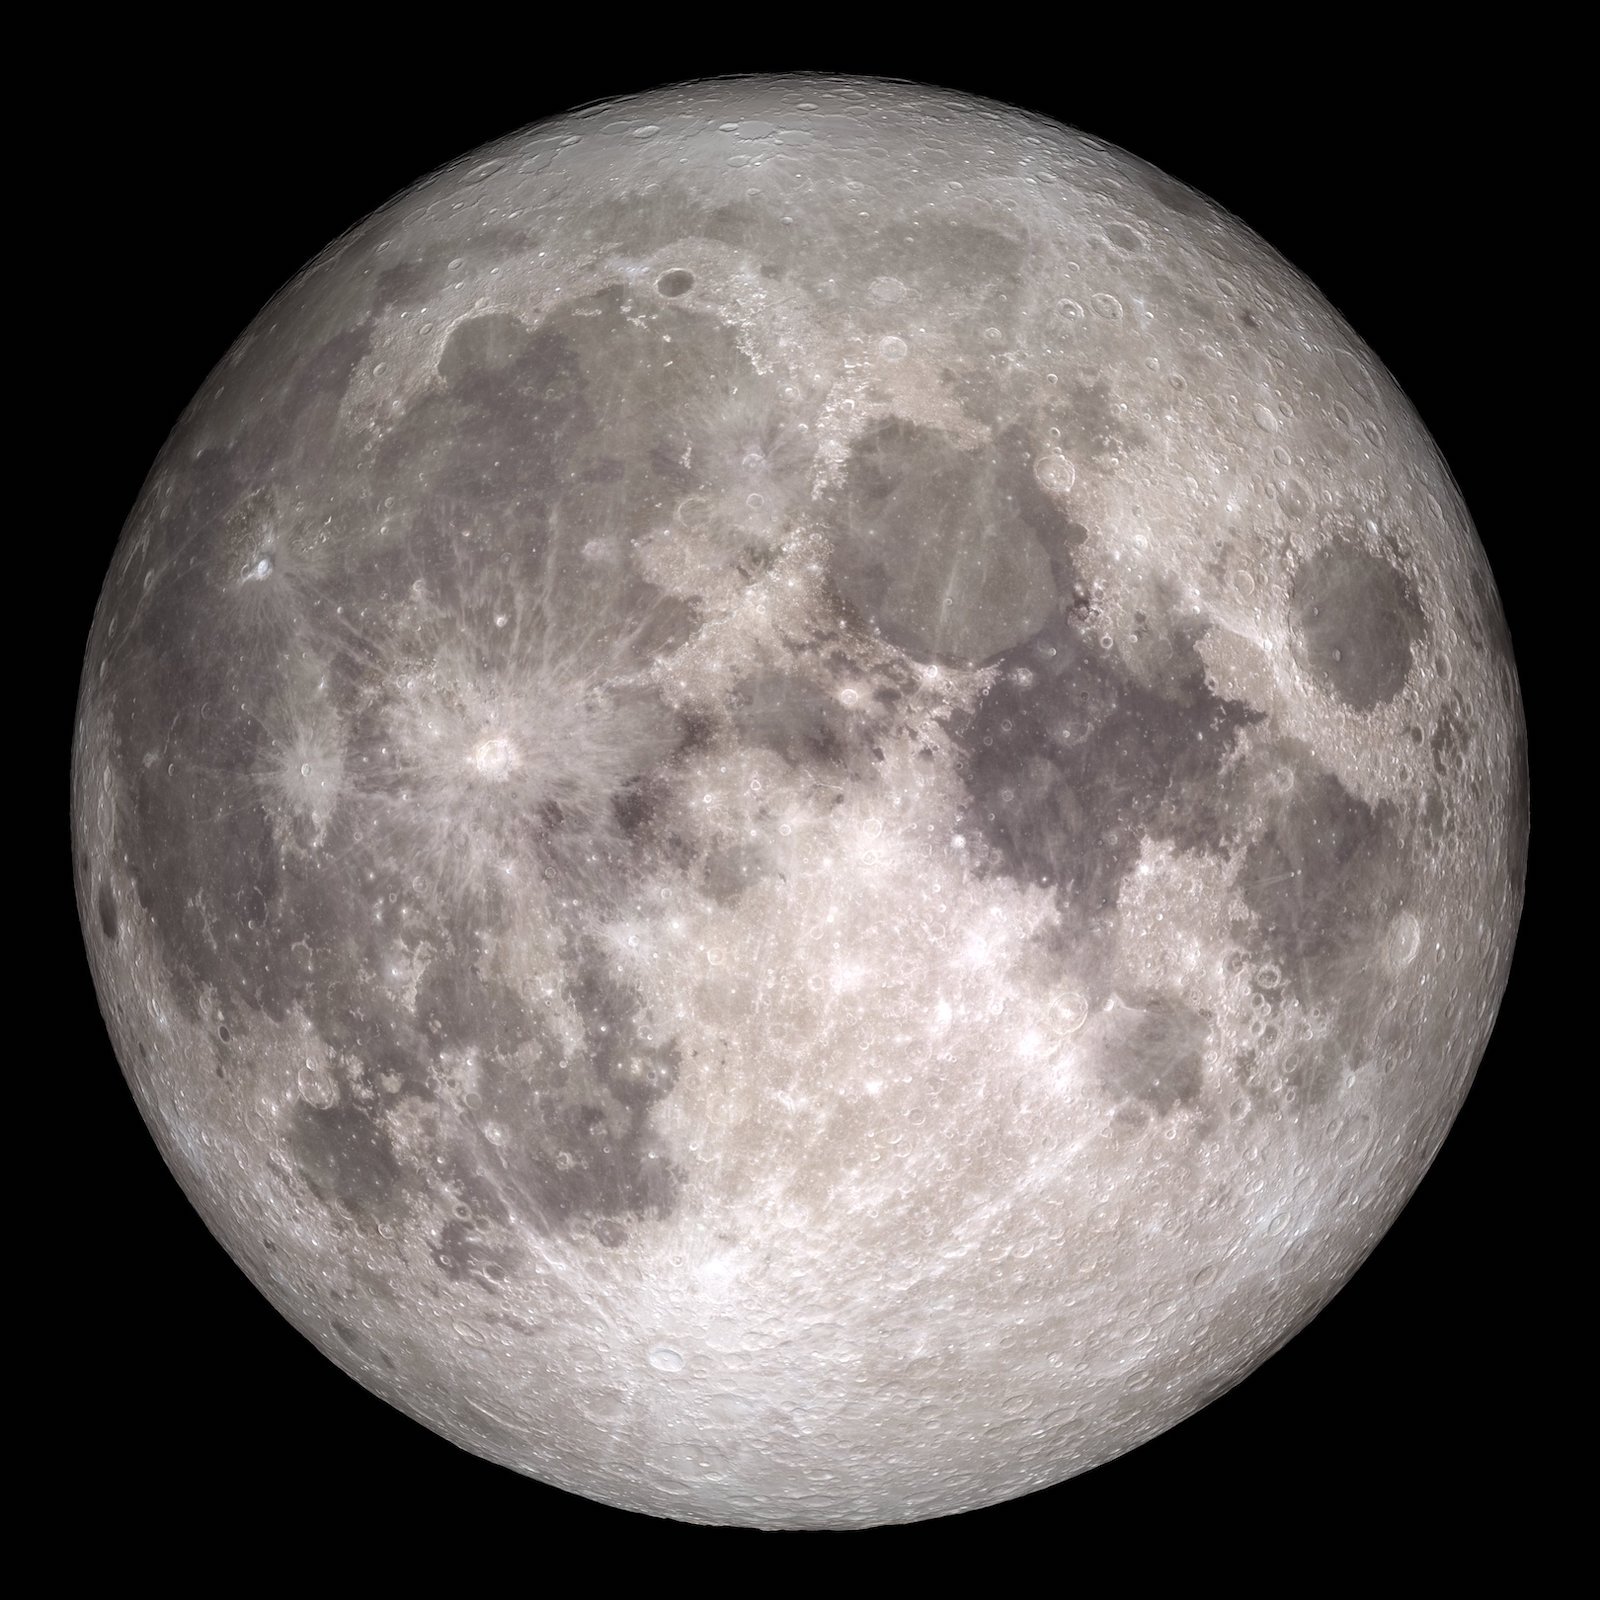 Close-up view of a full moon.